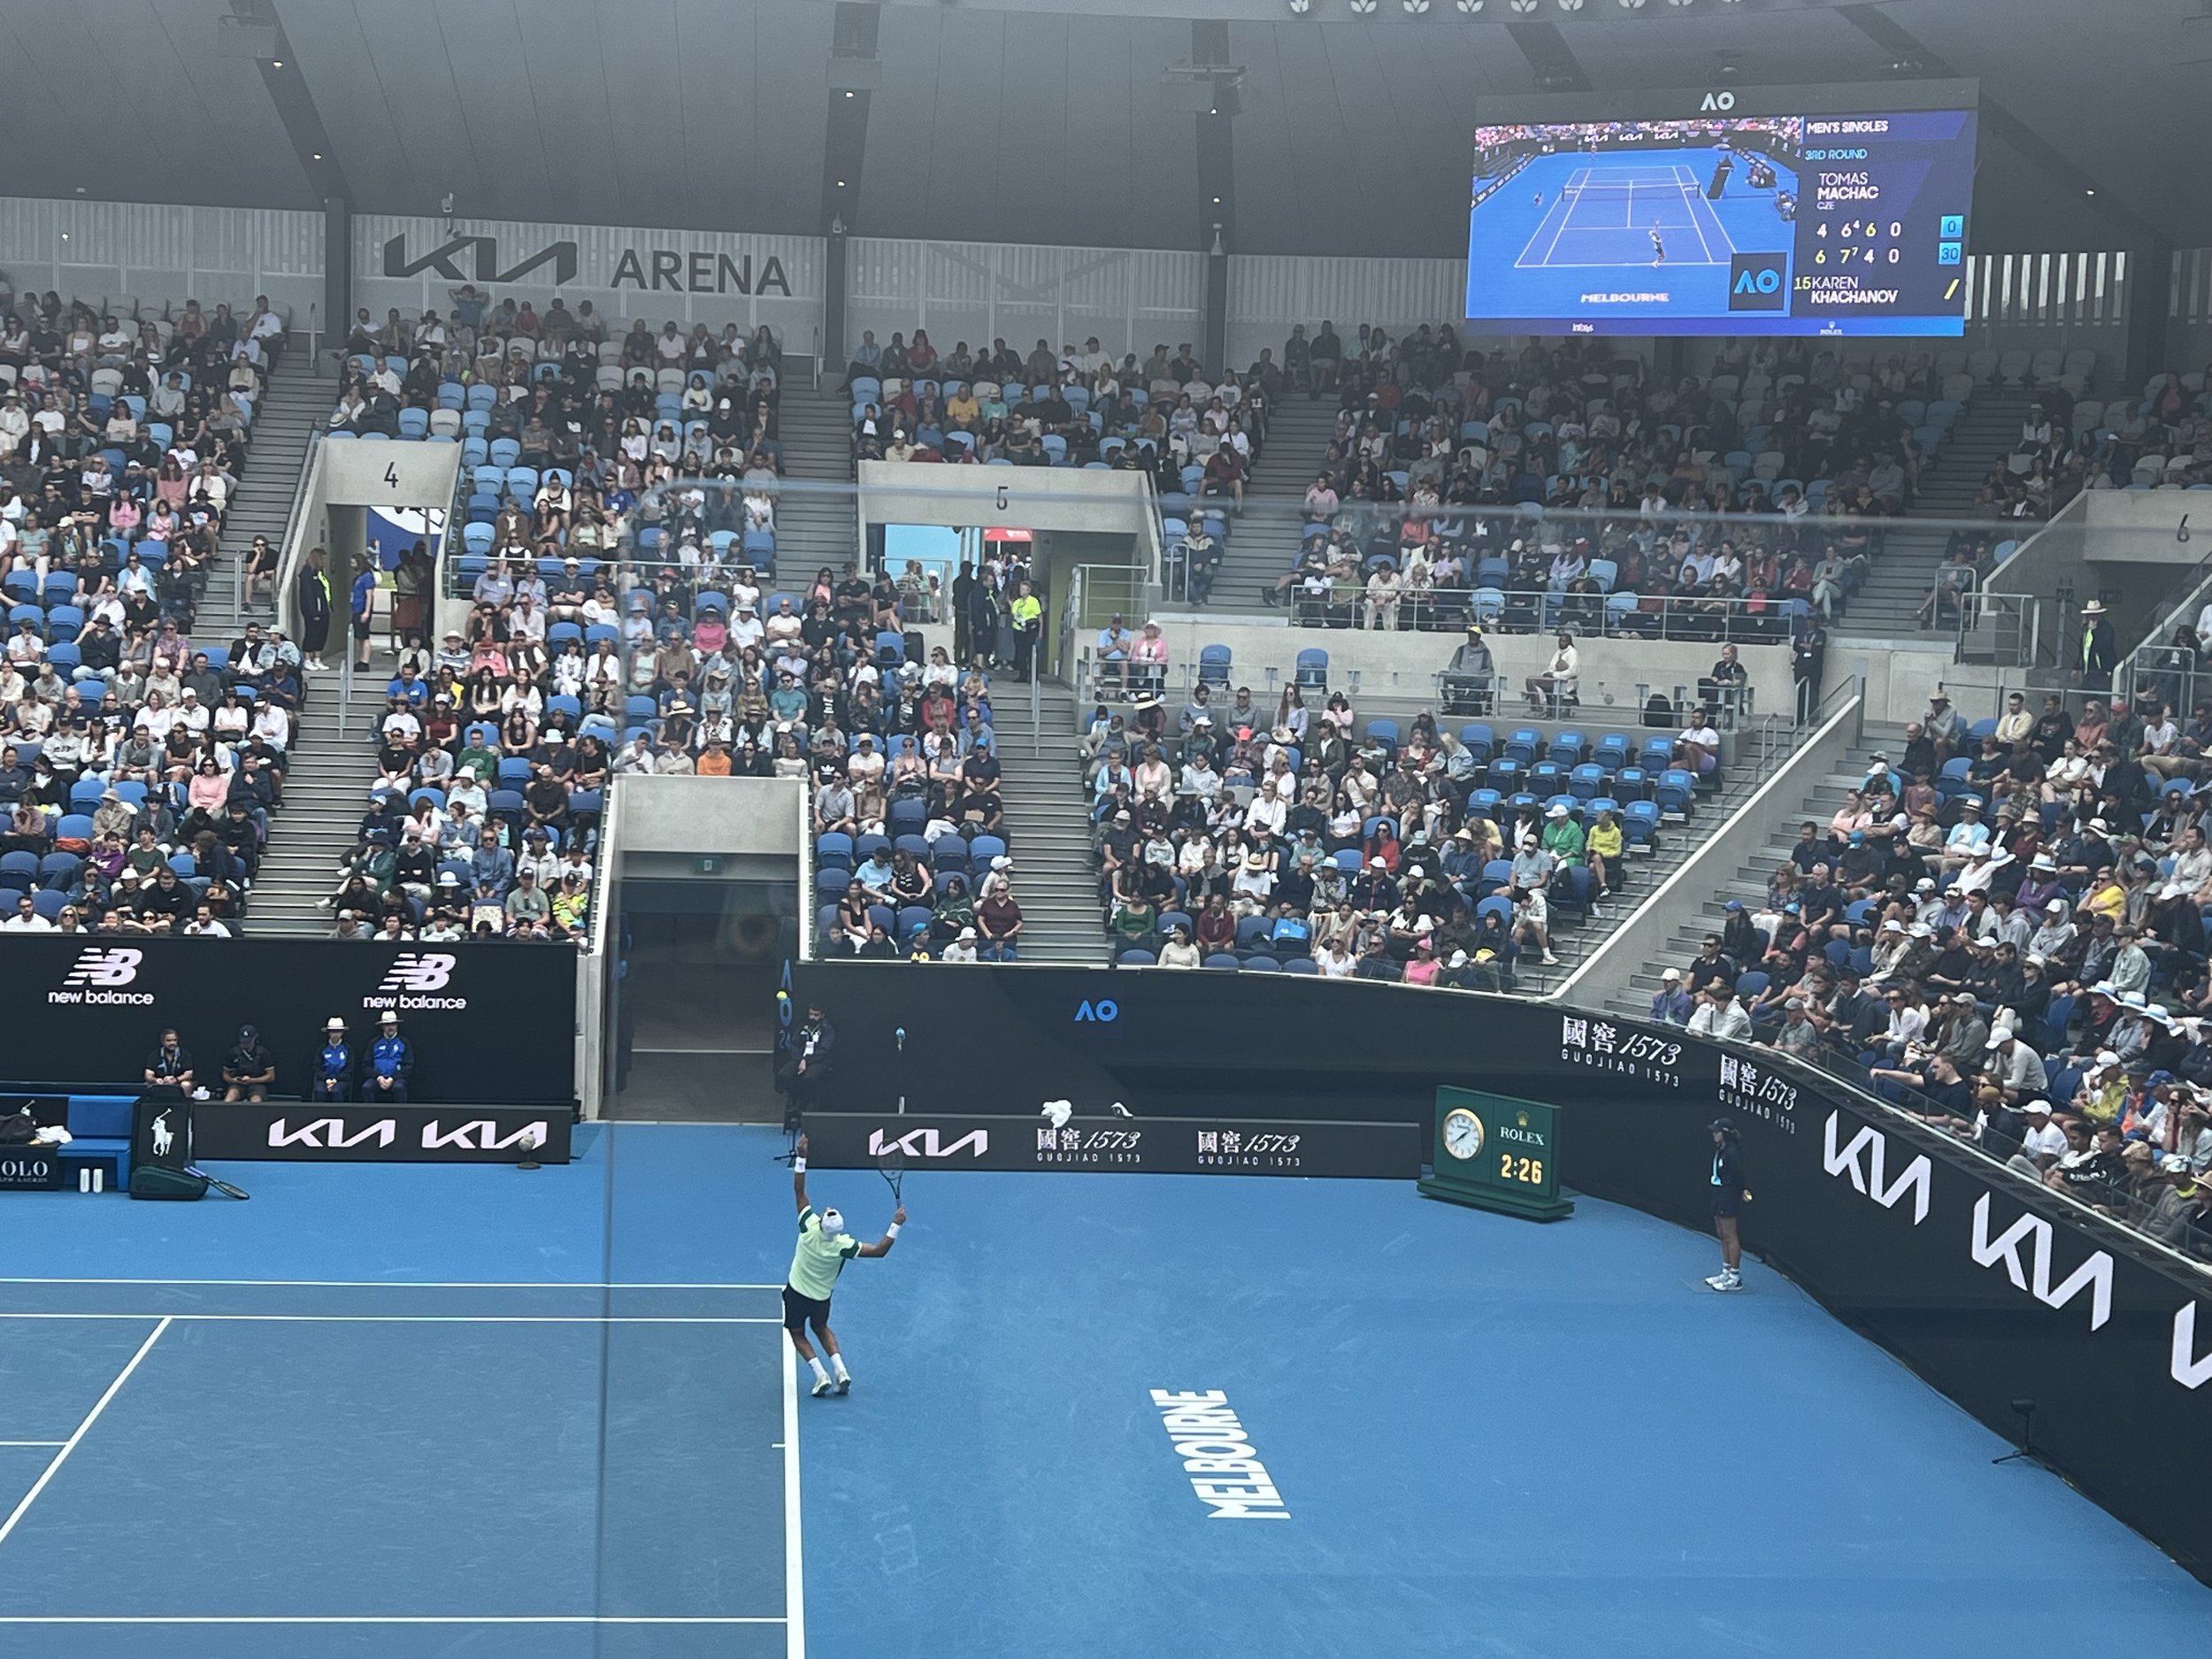    Image 2: A photo of a male tennis player serving during a match at Kia Arena.   